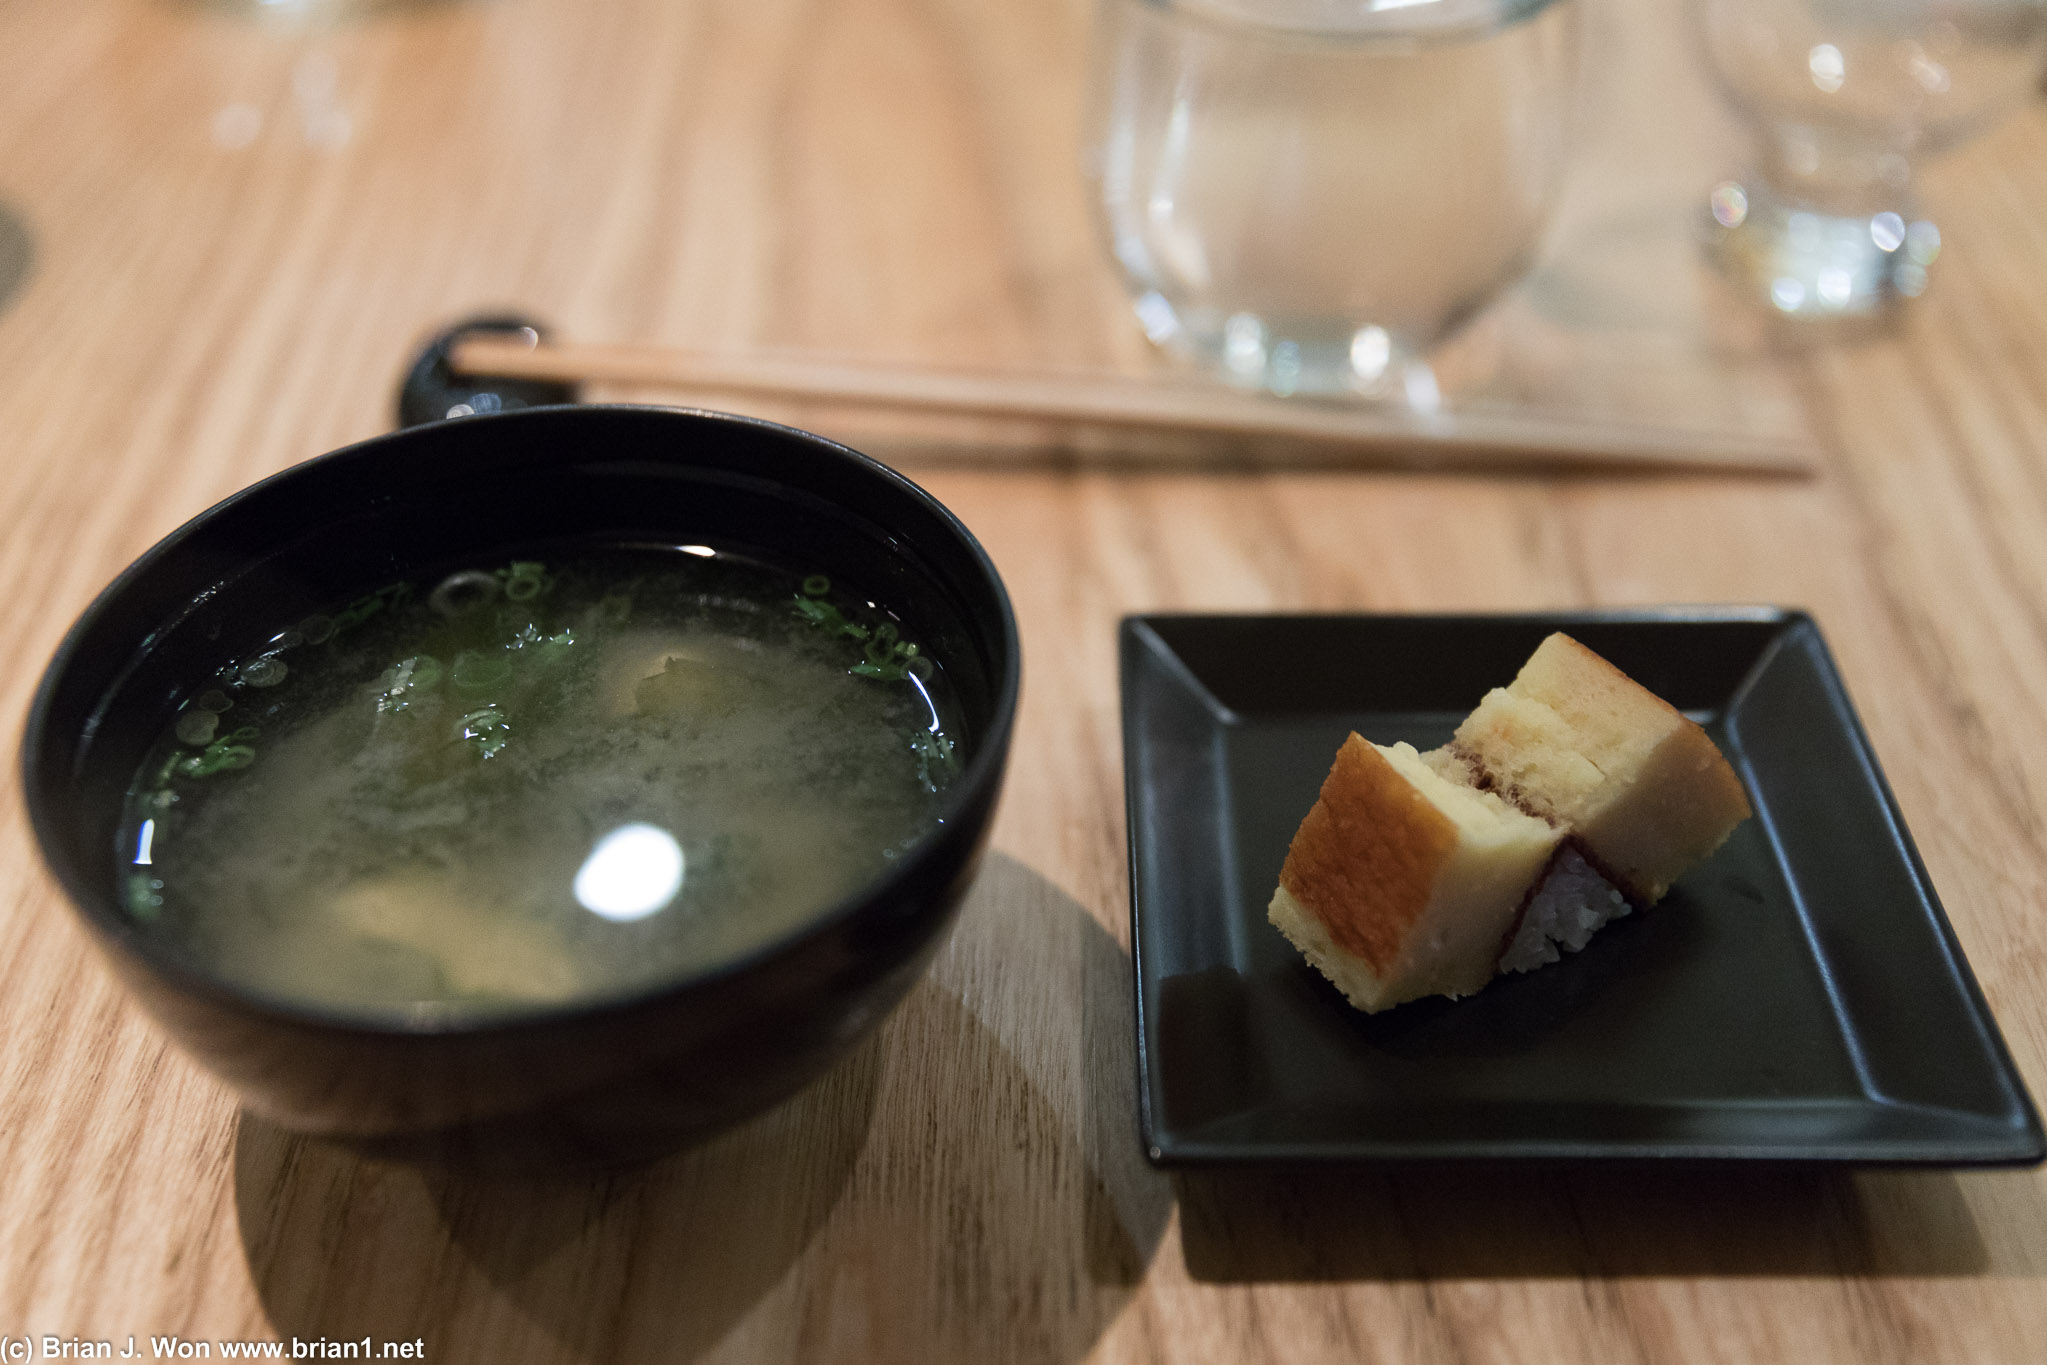 Miso soup and tamago.